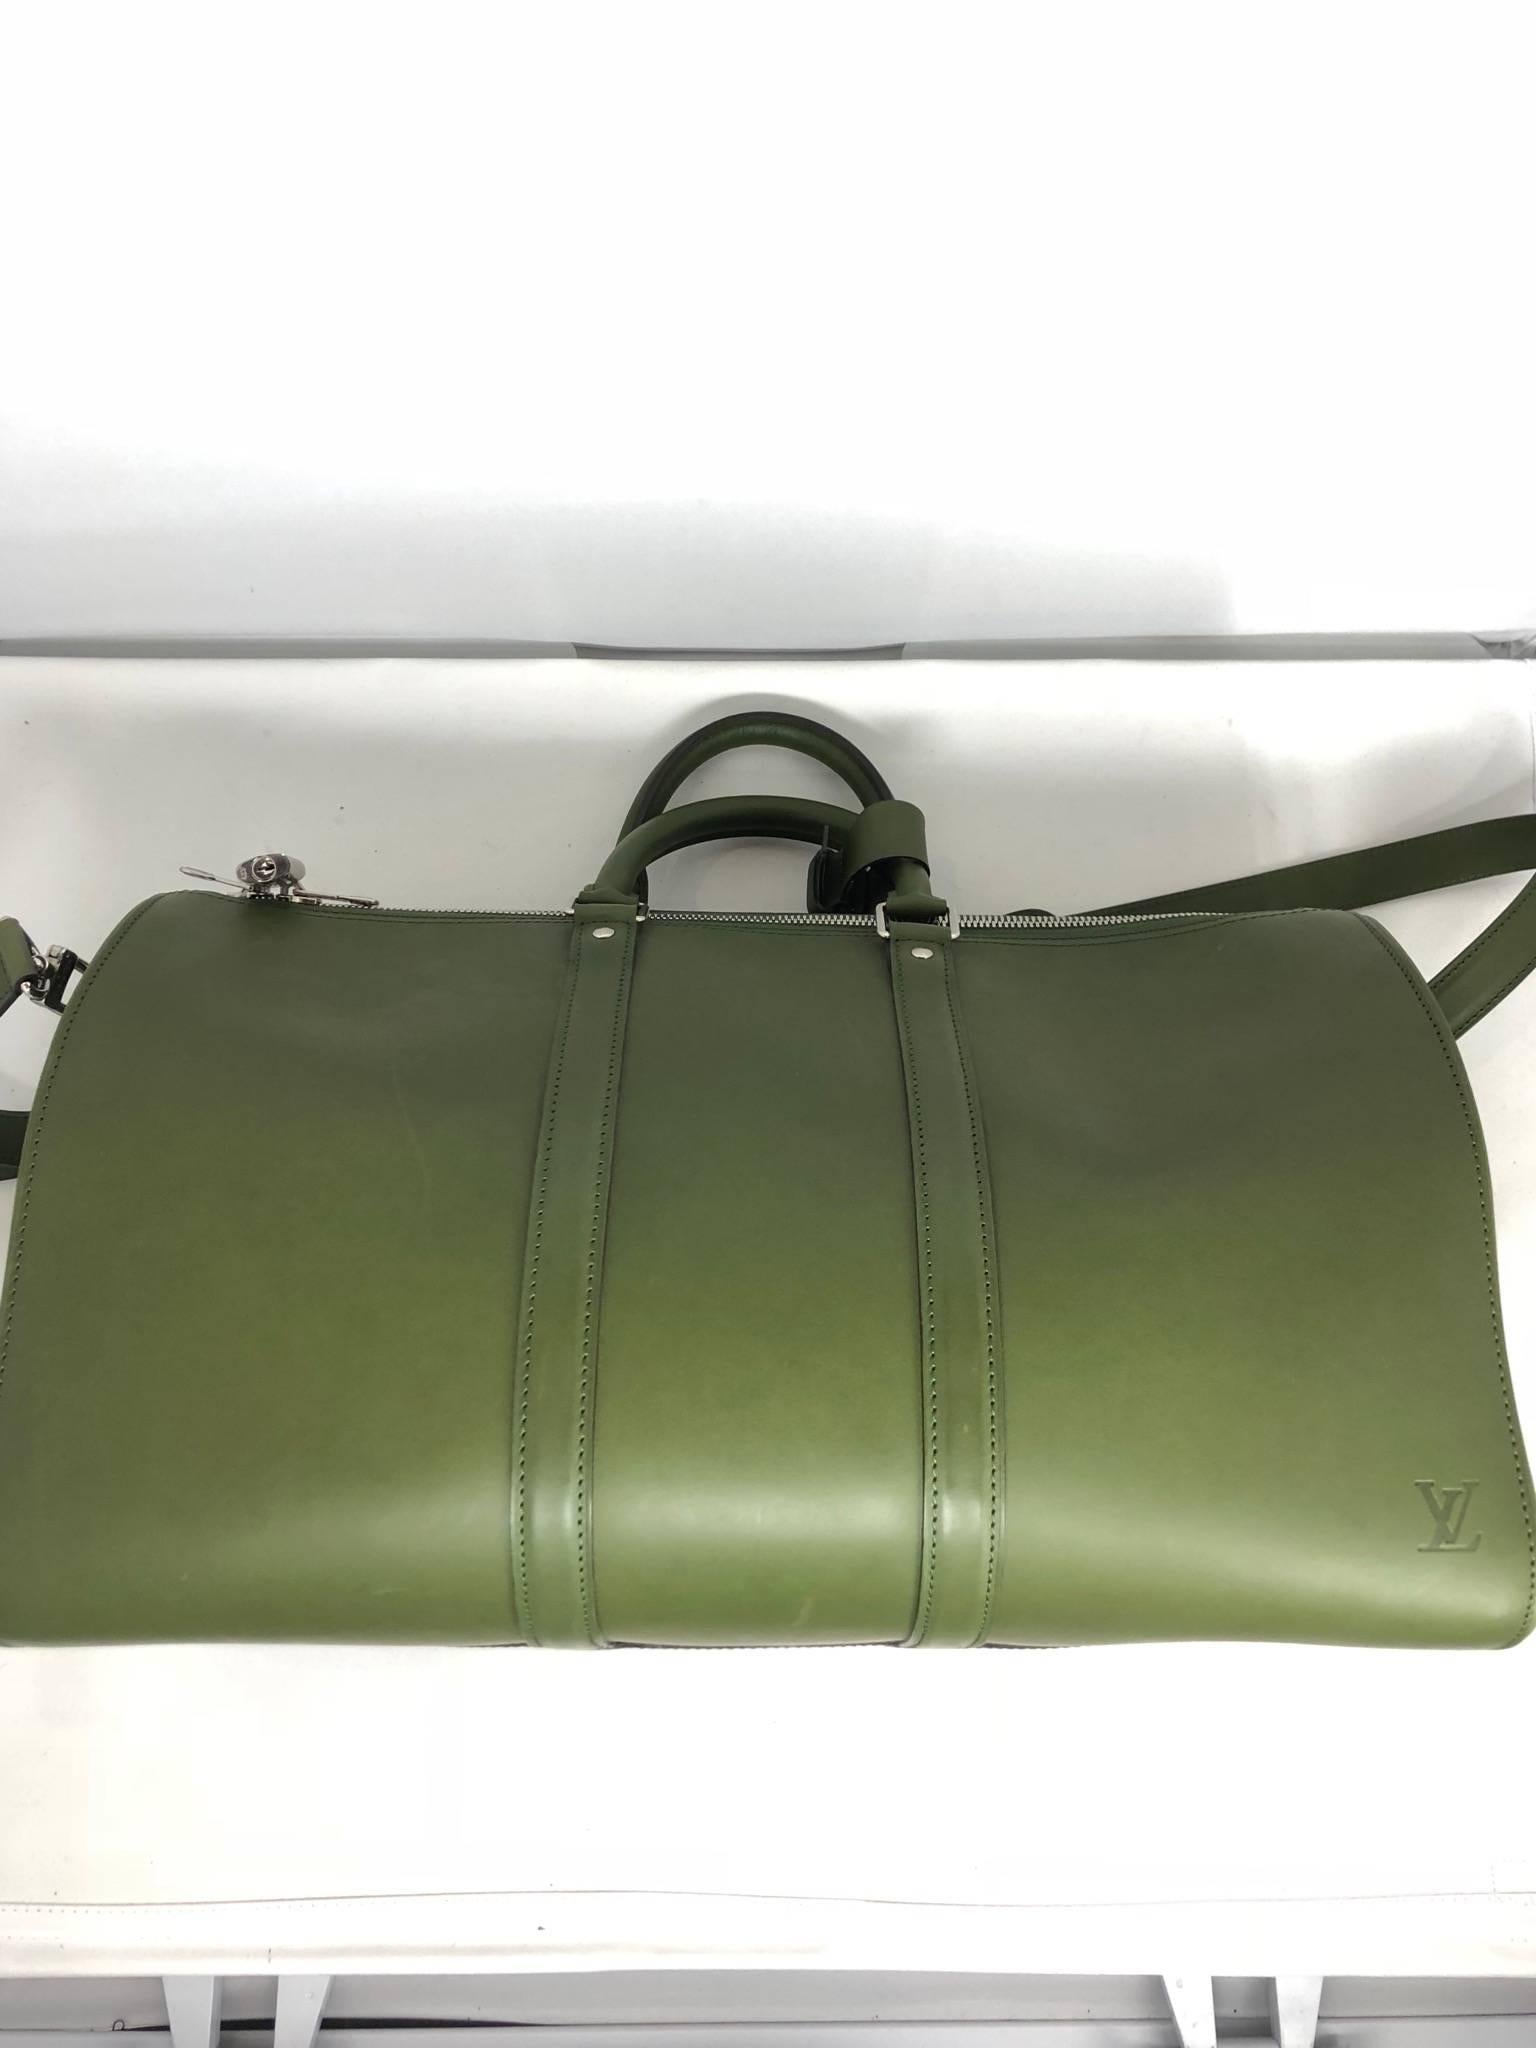 Louis Vuitton Nomade leather Keepall 50 Bandouliere in vert green. The special leather is super-smooth and was created back in 1860 by the House. It was re-introduced in the 2012 collection with new colors and shapes. This piece is from the 2012